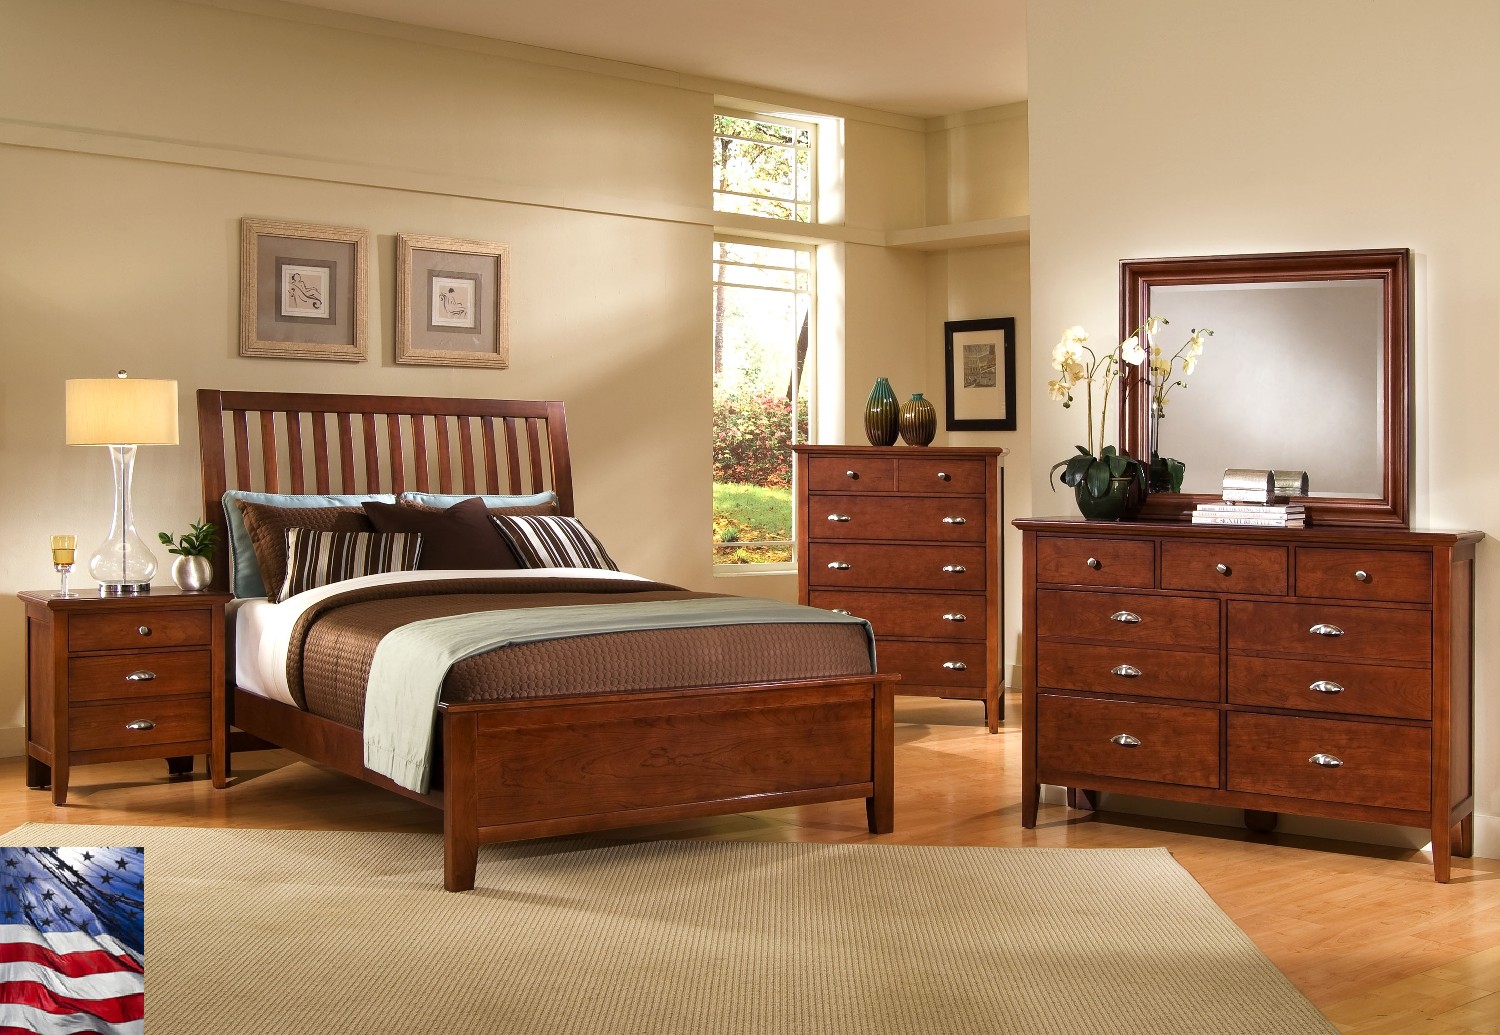 Textured Bedding With Brown Furniture